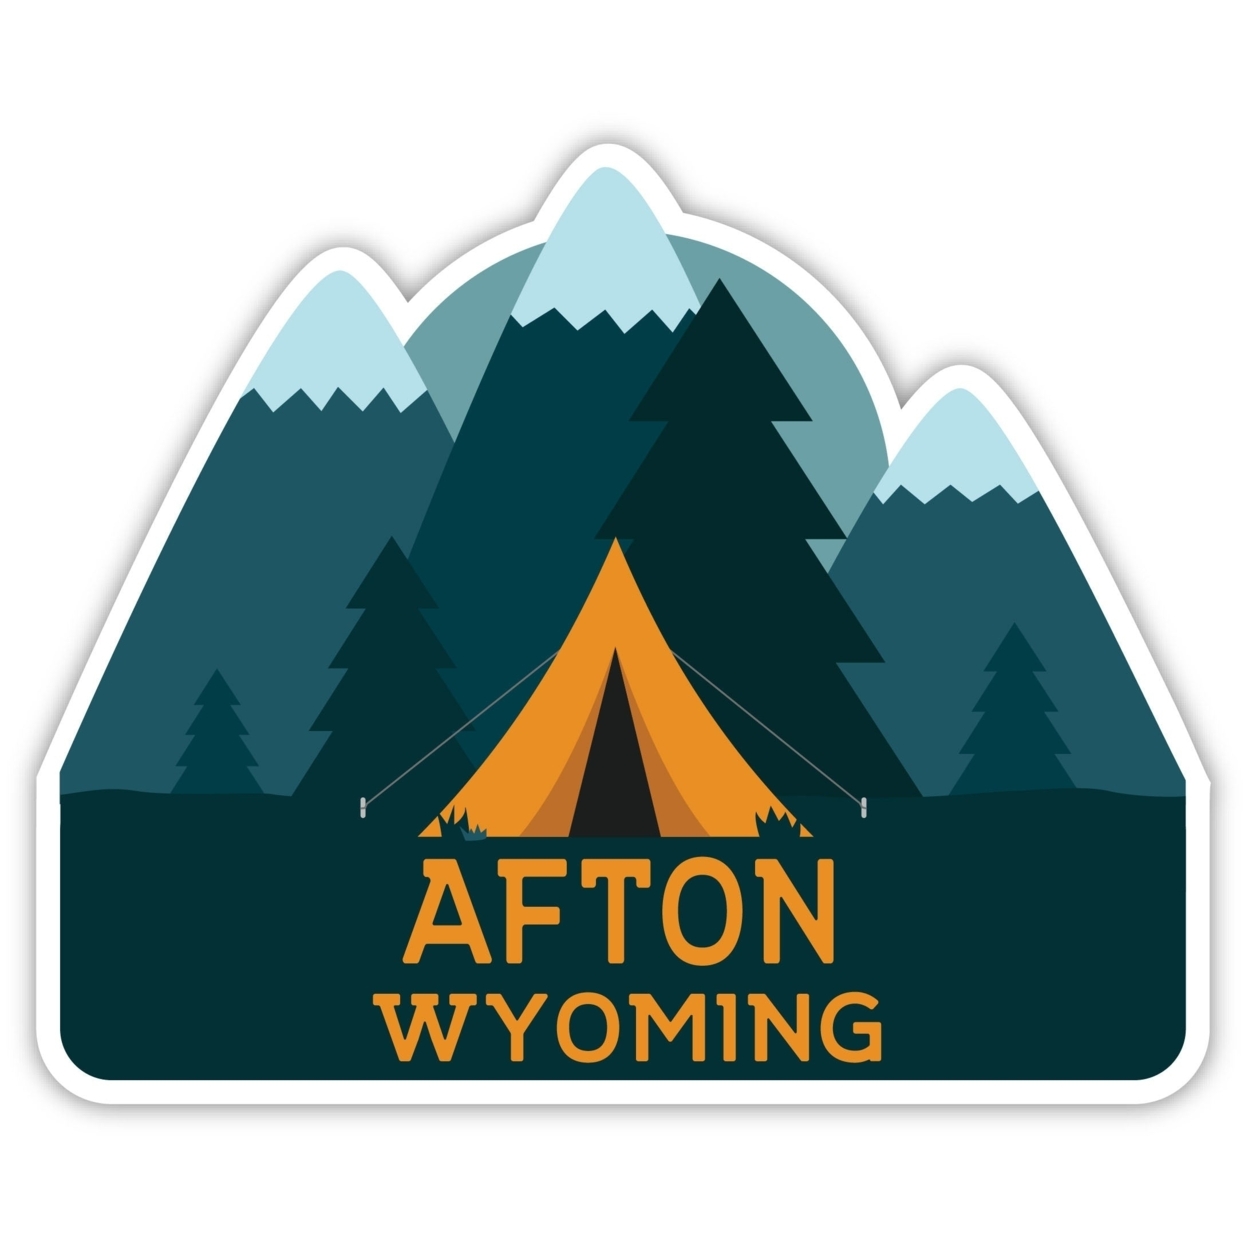 Afton Wyoming Souvenir Decorative Stickers (Choose Theme And Size) - Single Unit, 2-Inch, Tent